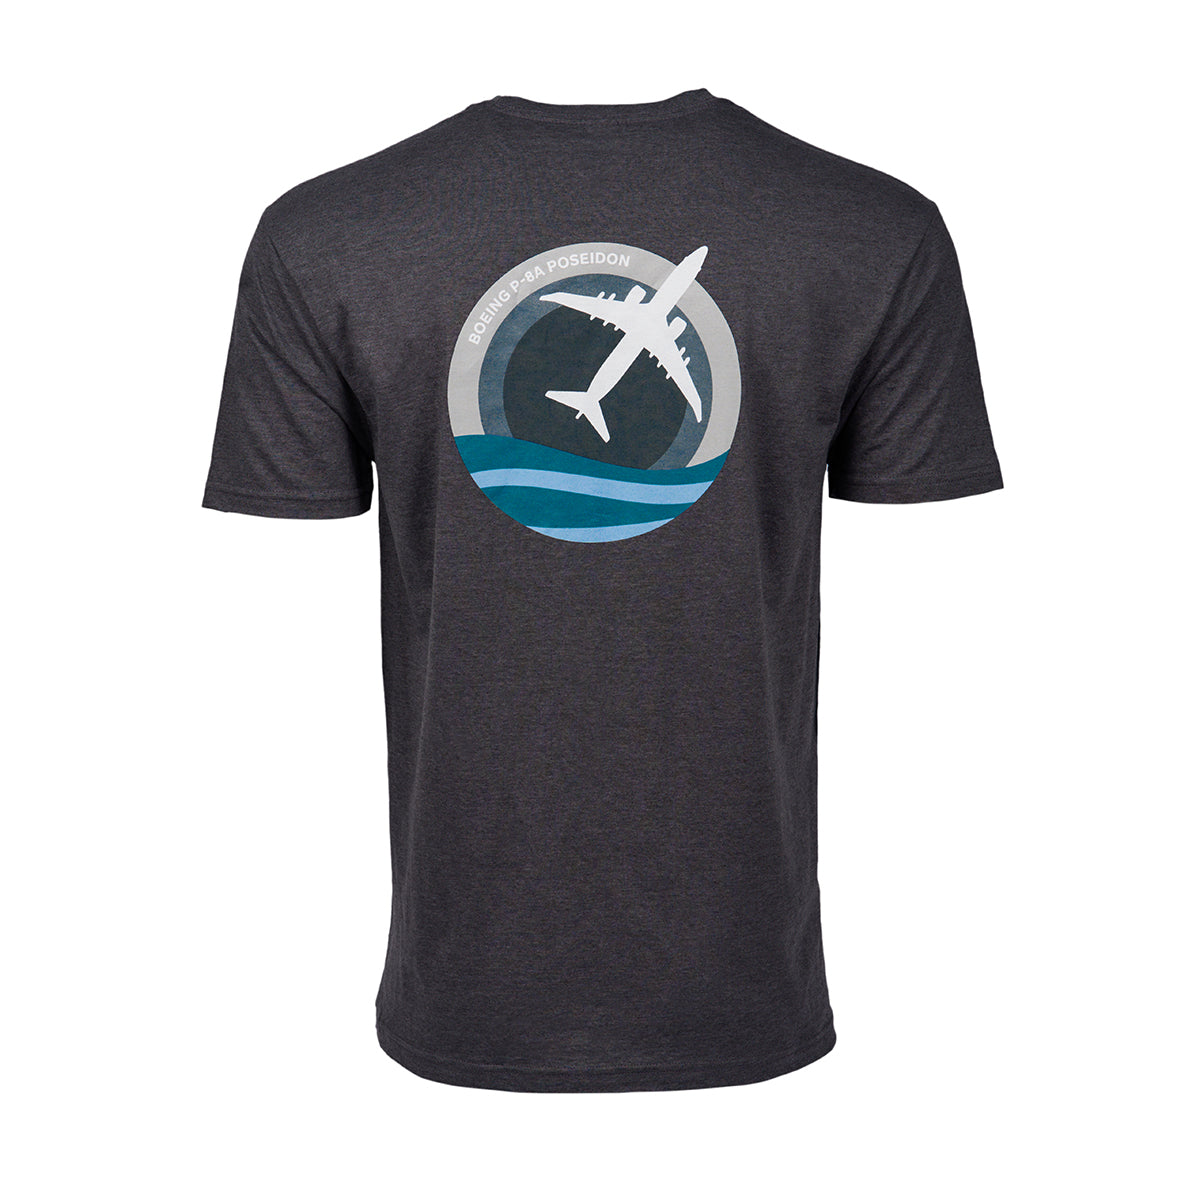 Full product image of the back side of the t-shirt in a heather grey color.  Showing the Skyward graphic of the Boeing P-8 Poseidon.